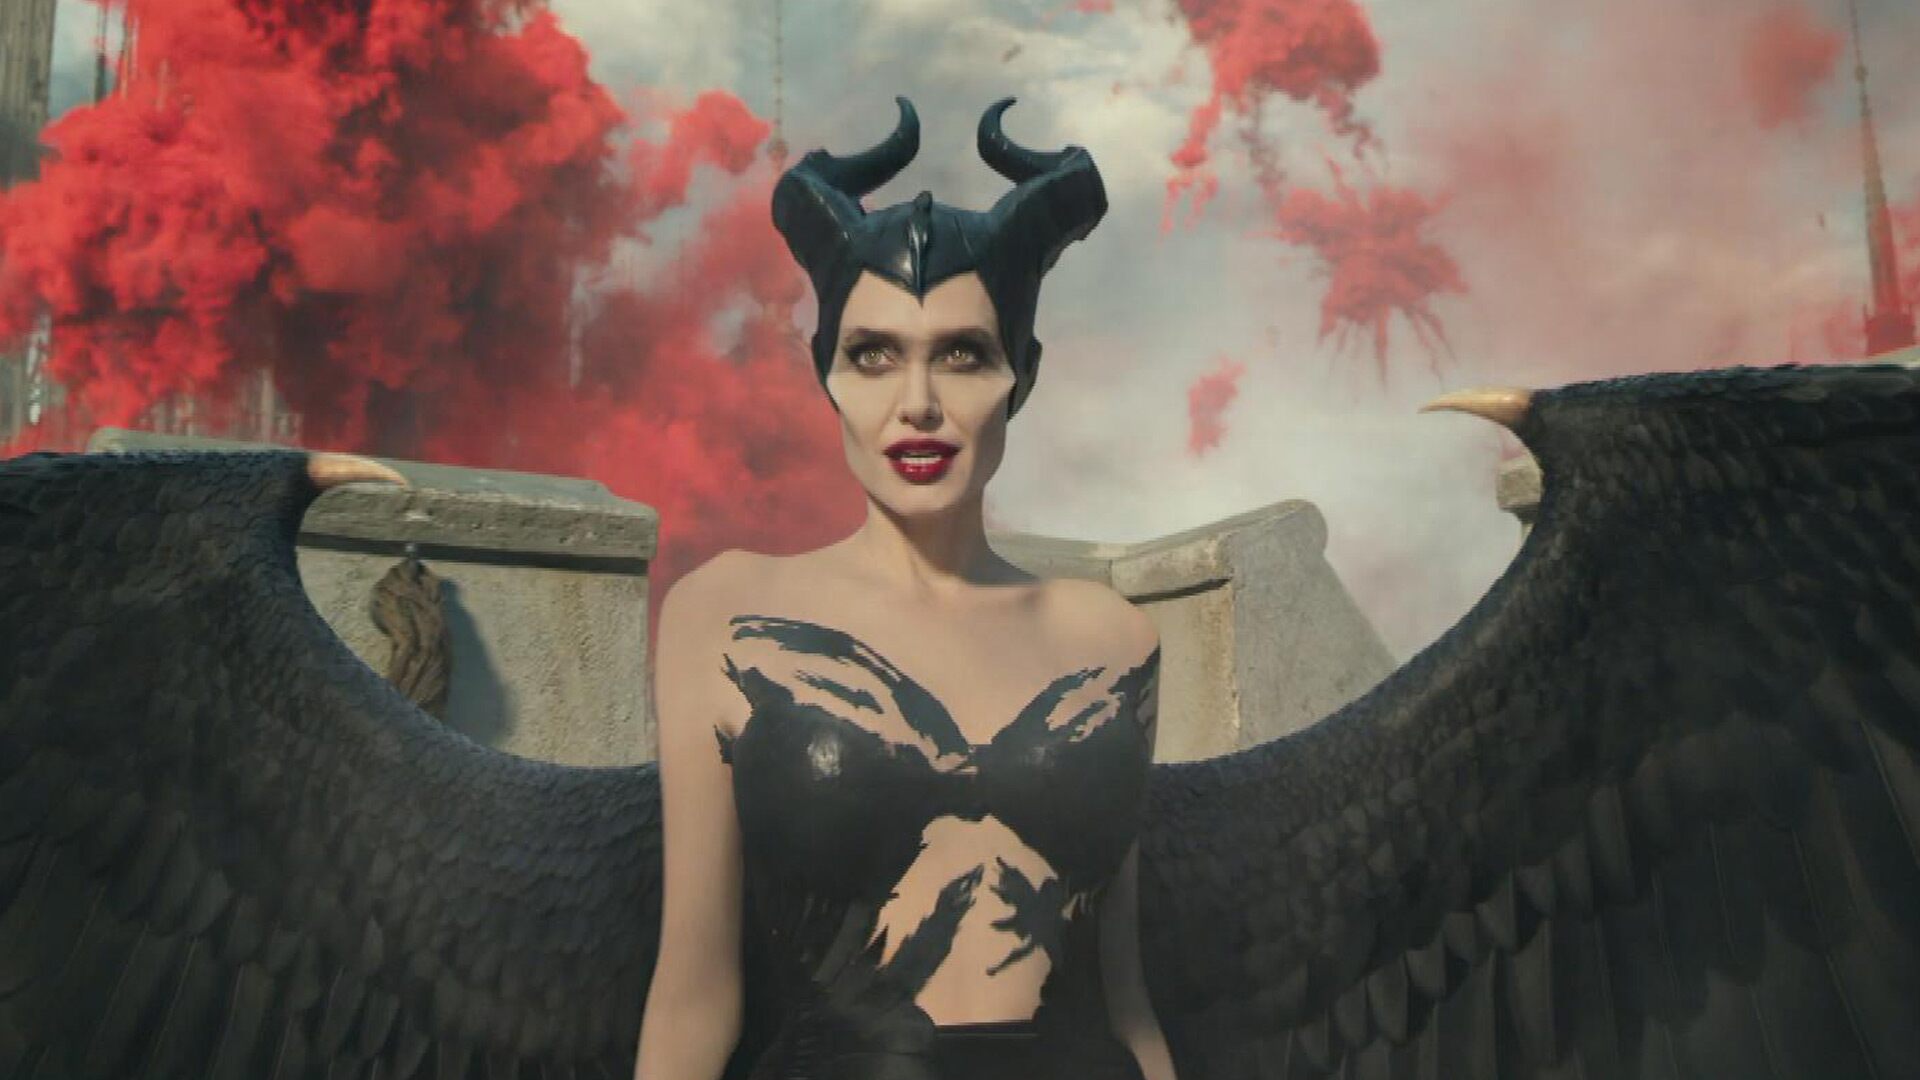 Early Forecast Numbers For Disney’s Maleficent: Mistress Of Evil Released